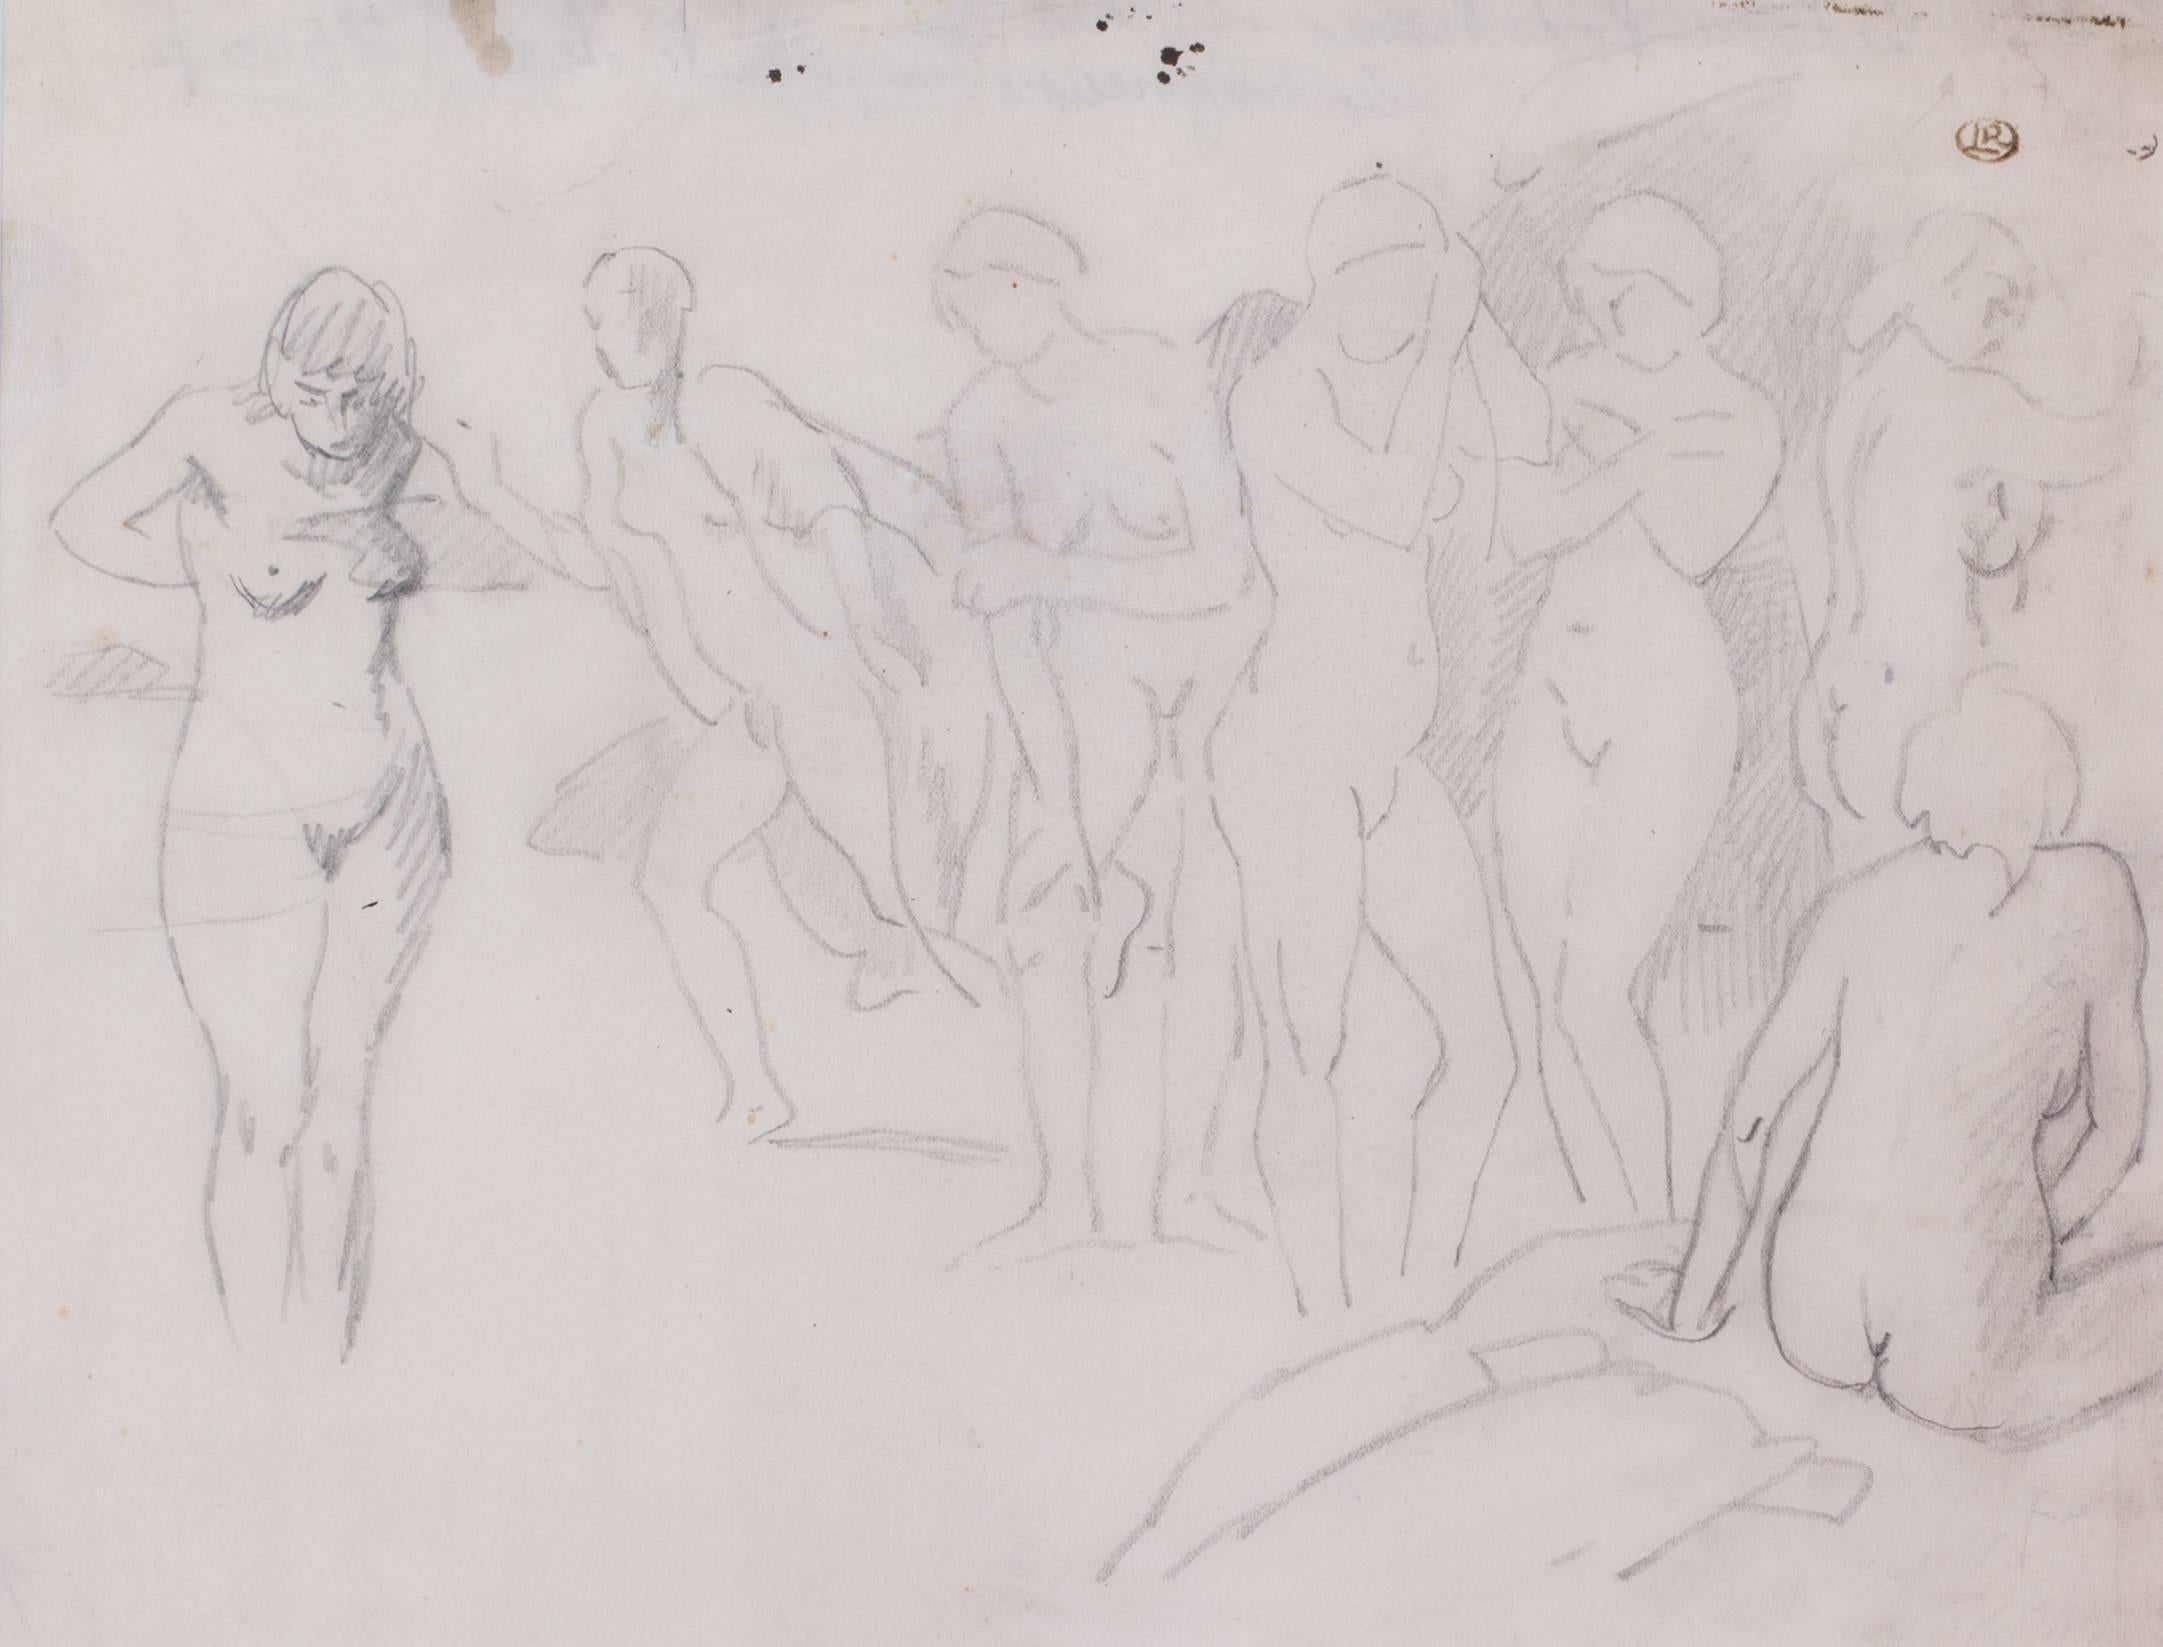 An original French drawing of nude bathers by Post-Impressionist Pissarro - Art by Ludovic-Rodo Pissarro